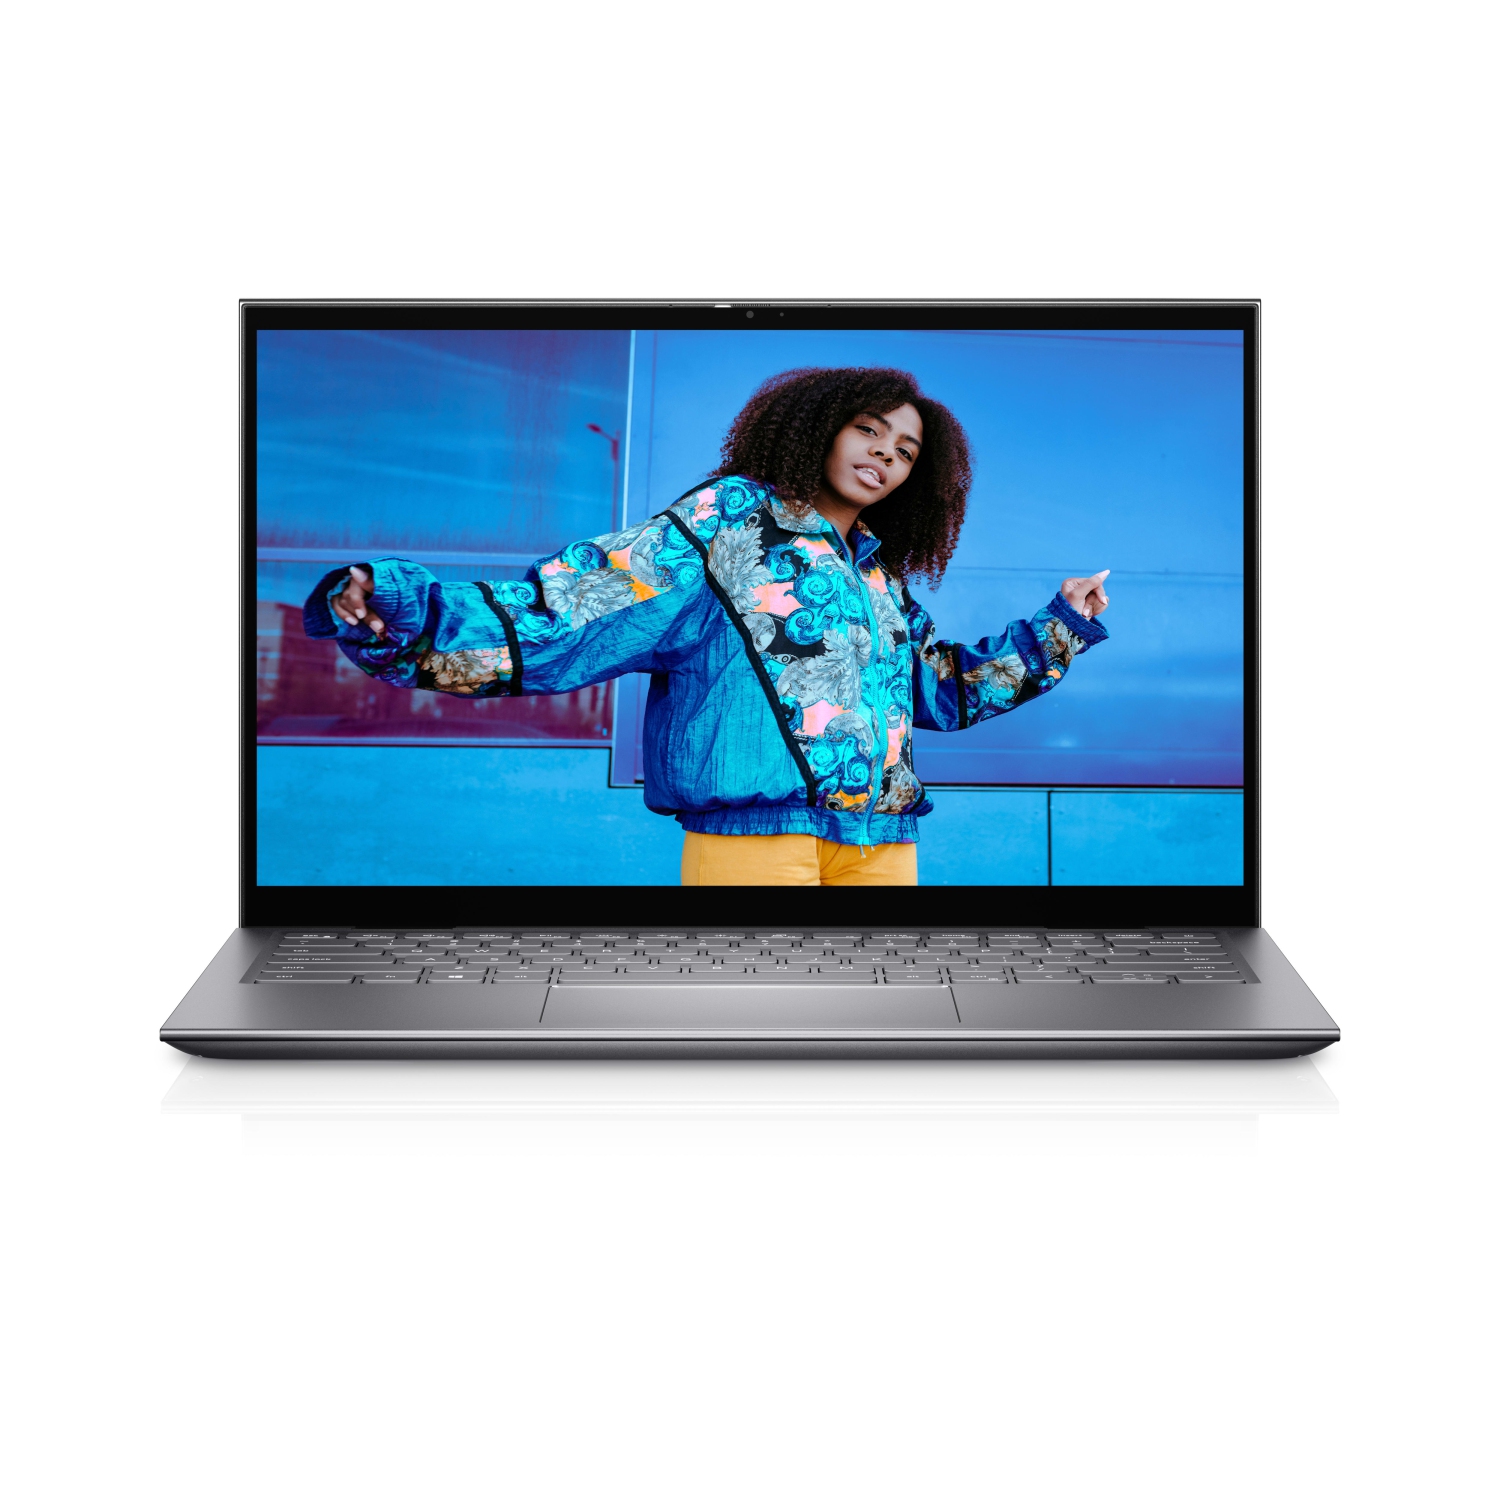 Refurbished (Excellent) – Dell Inspiron 5410 2-in-1 (2021) | 14" FHD Touch | Core i5 - 256GB SSD - 12GB RAM | 4 Cores @ 4.5 GHz - 11th Gen CPU